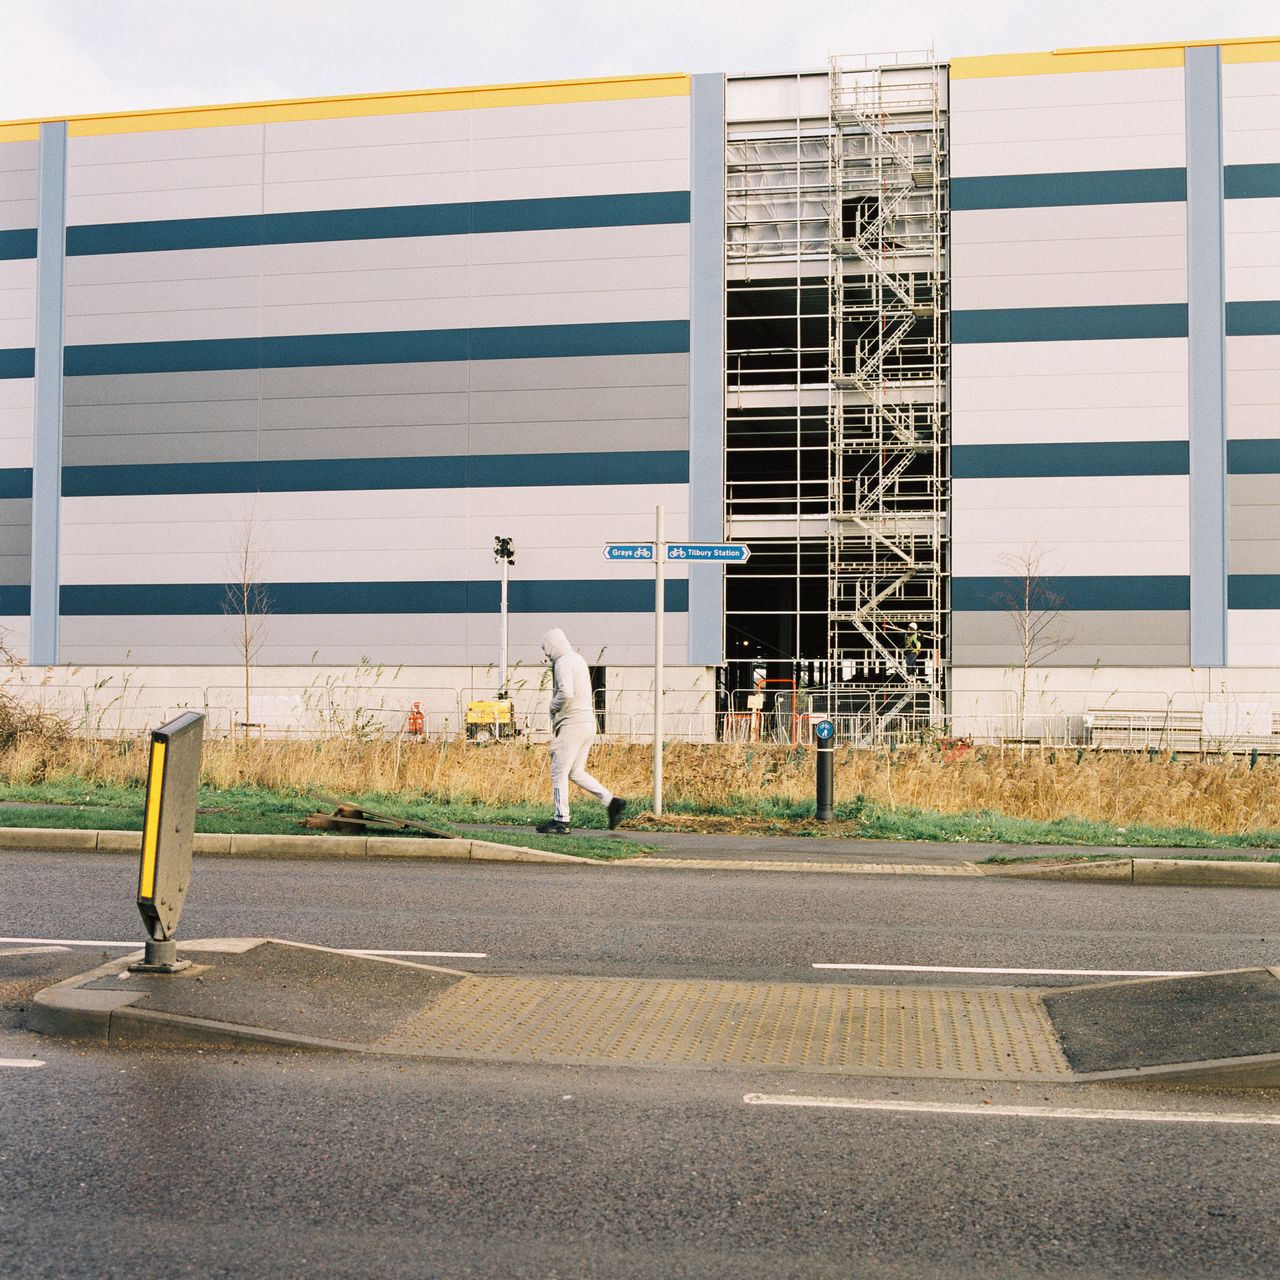 The new Amazon warehouse rises on the outskirts of Tilbury. Jan. 12.